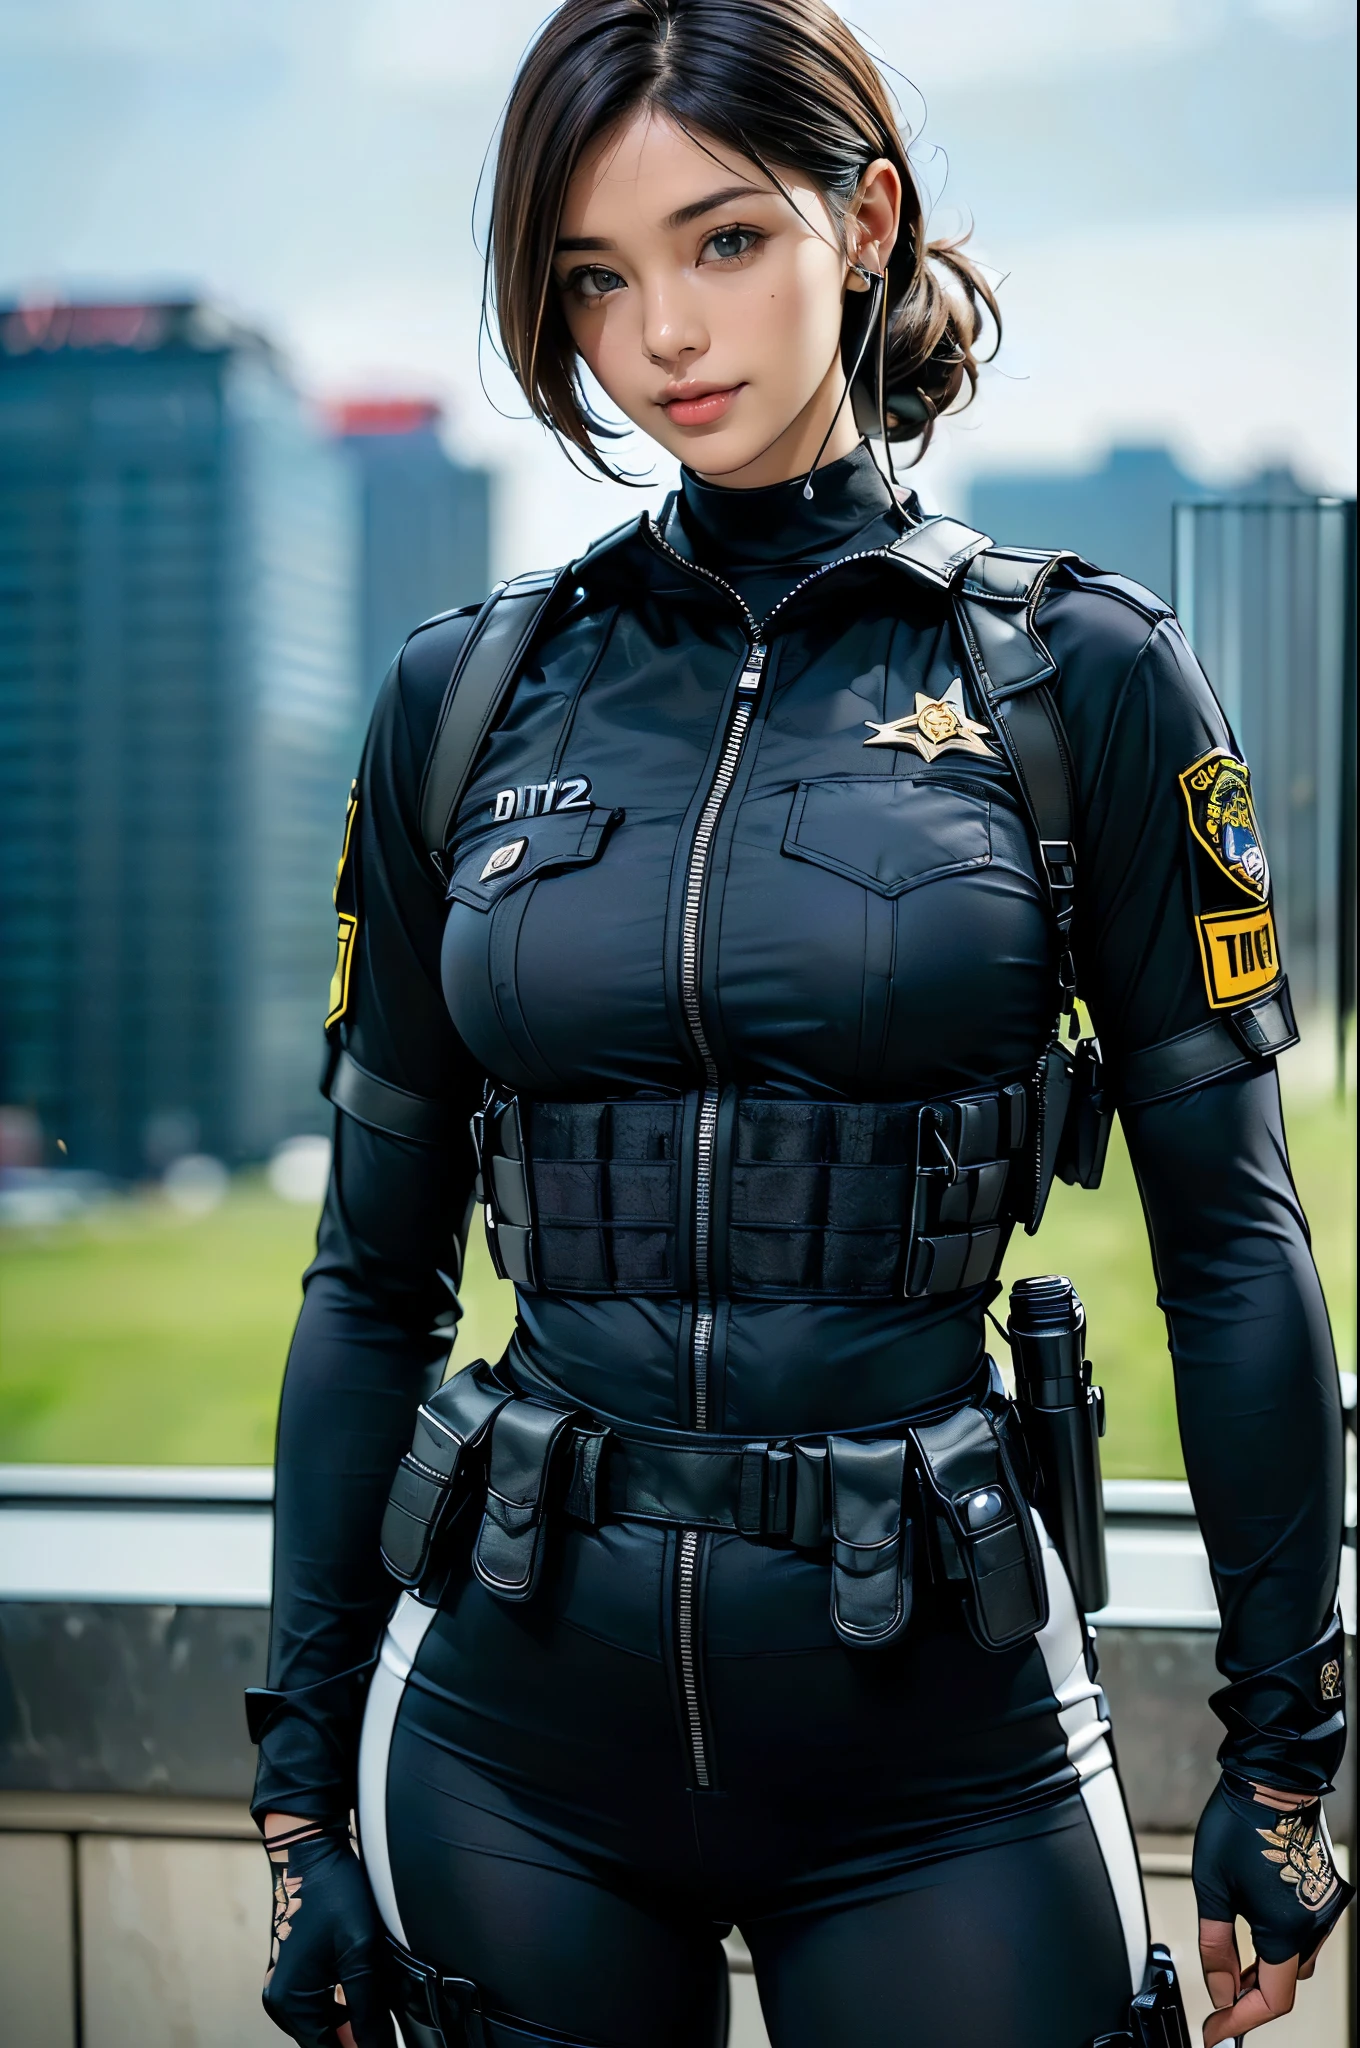 (Two Women),(((Female SWAT officers standing side by side:1.5))),((Black Tactical Bodysuit:1.5)),((Black headset:1.5)),((black tactical holster:1.5)),(Black gloves:1.5),((wearing the same uniform:1.5)),(smile:1.5),(Beautiful Eyes:1.3),(Very detailedな顔:1.5),((Very detailed drawing of a female hand:1.5)),((muscular:1.5)),(Sexy Looks:1.5),((Thick thighs:1.5)),(Beautiful body:1.5),((Very sensual:1.5)),(The background is the city:1.5),(((Blur the background:1.5))),(Written boundary depth:1.5),BREAK(((masterpiece:1.5),(highest quality:1.5),(Very detailed:1.5),(High resolution:1.5),(Realistic:1.5),(Realistic:1.5),(Delicate depiction),(Careful depiction))),8K,wallpaper